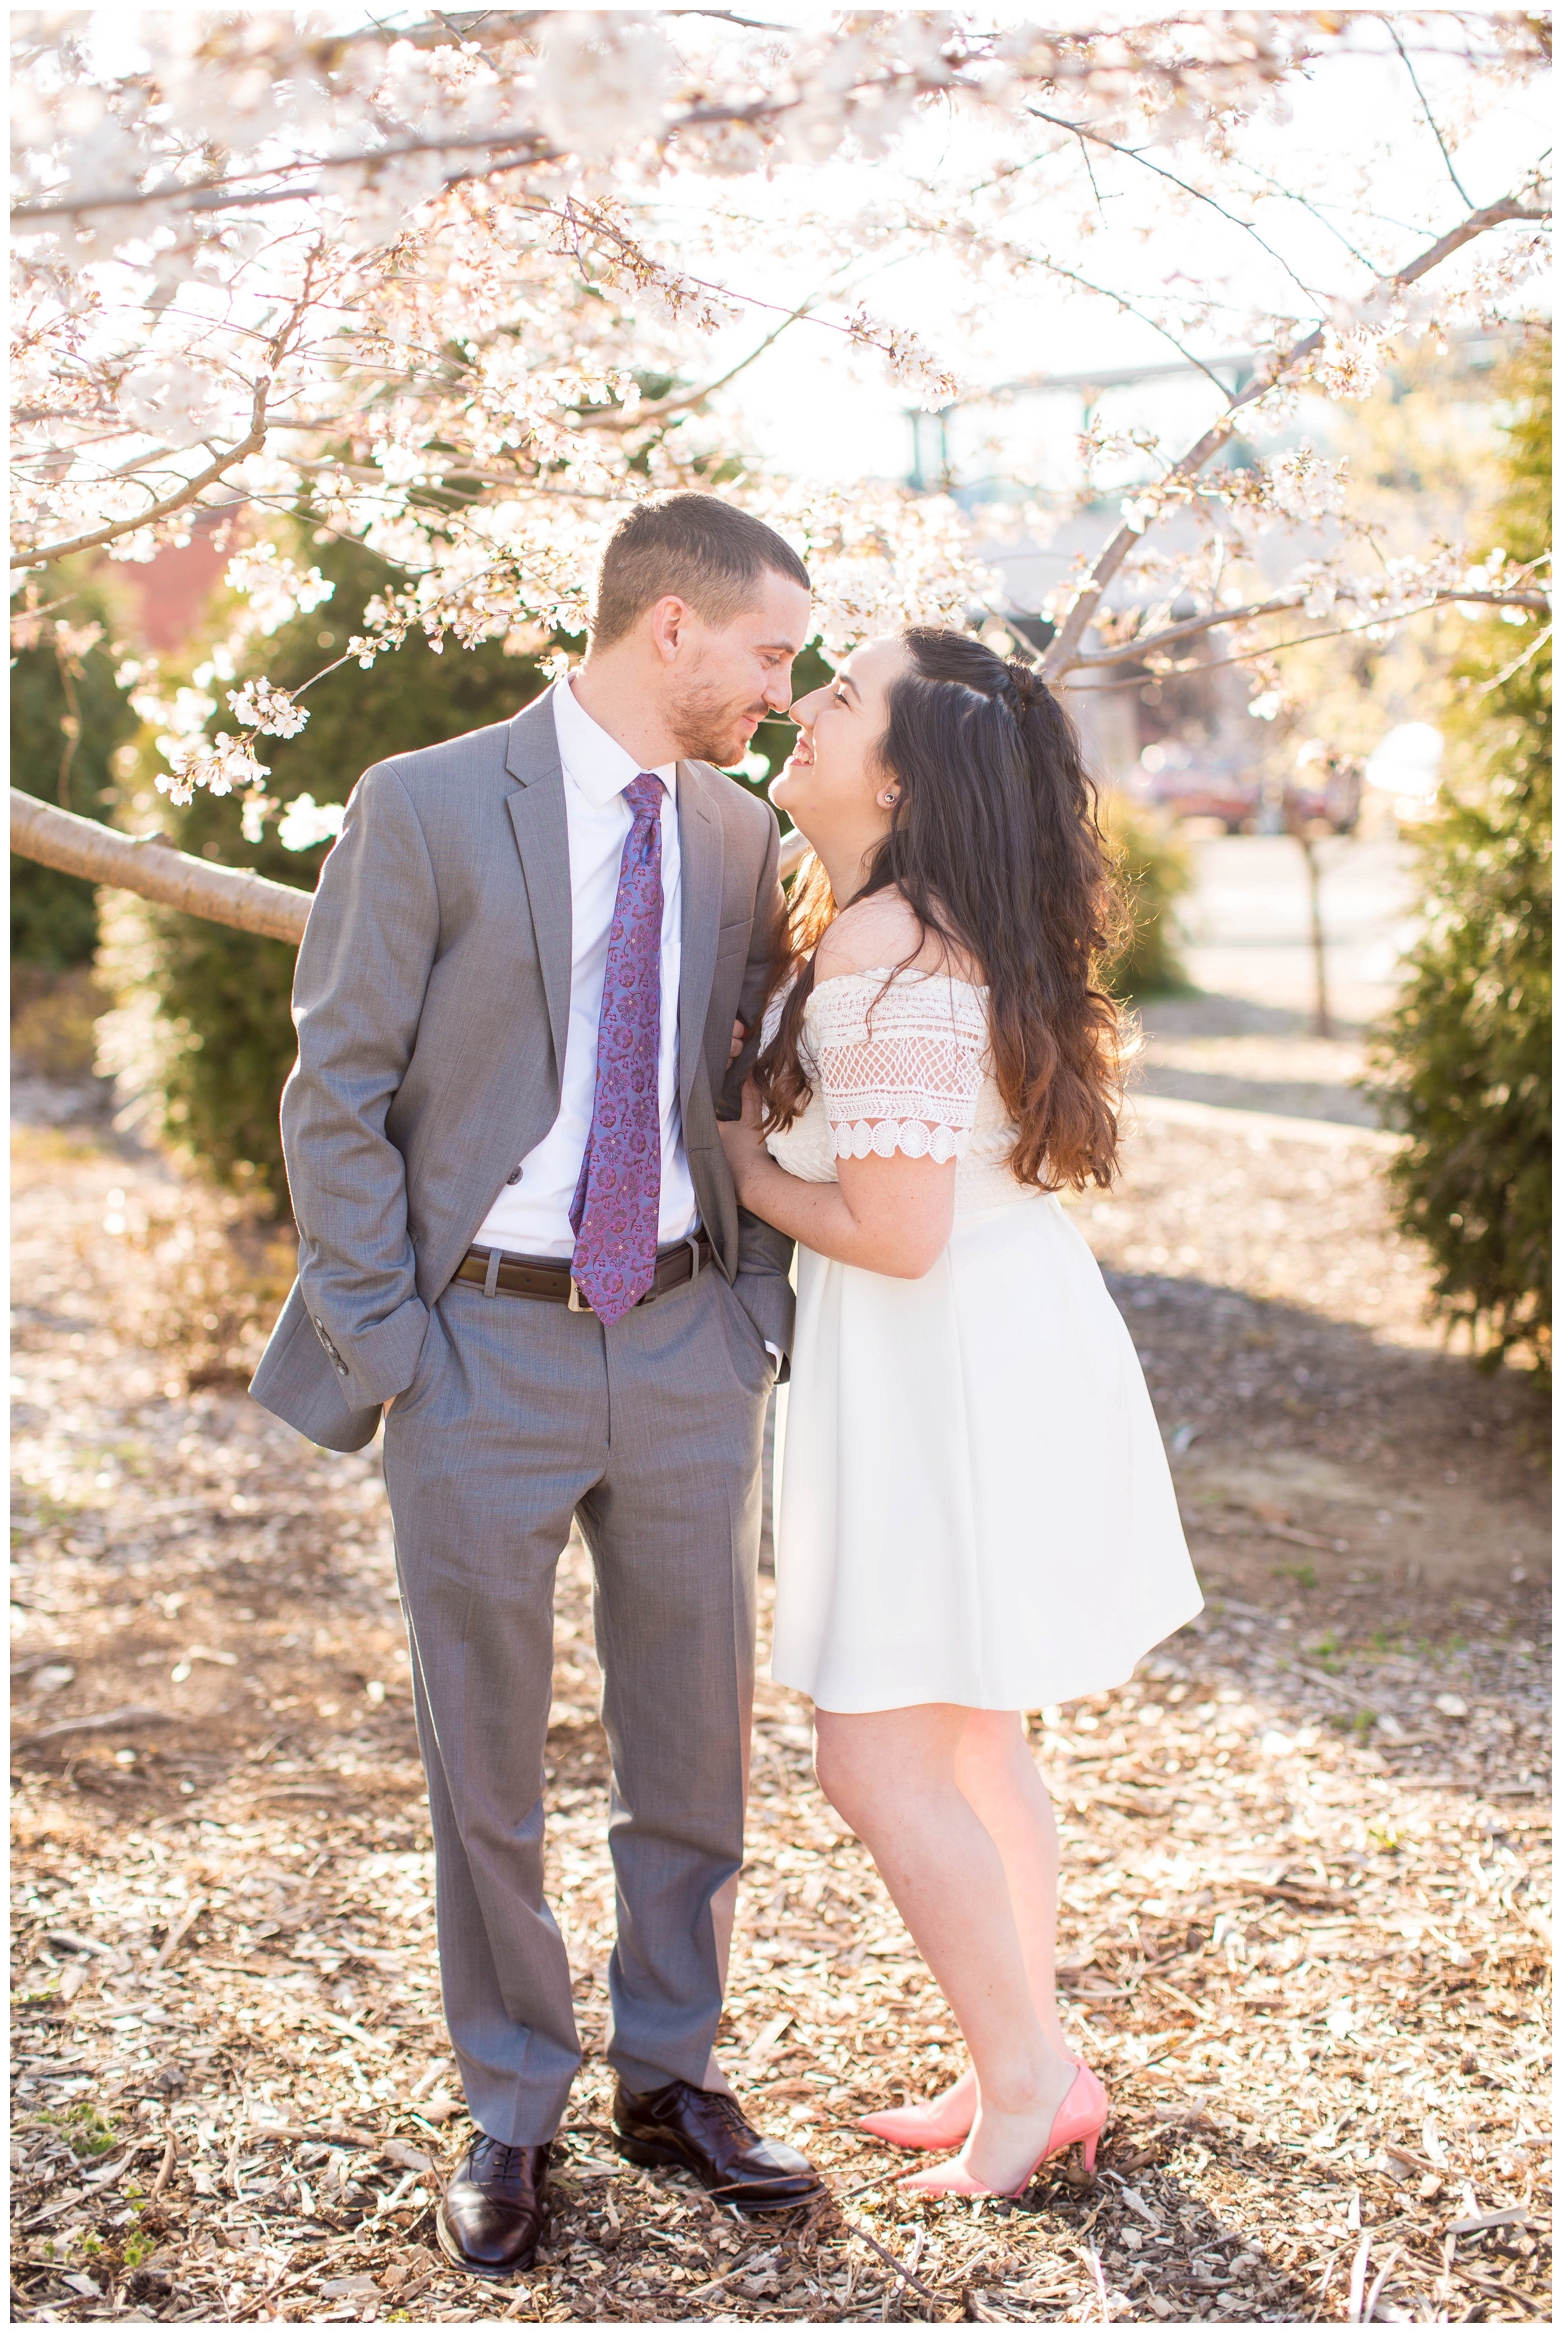 View More: http://hopetaylorphotographyphotos.pass.us/allysa-and-nathan-engagement